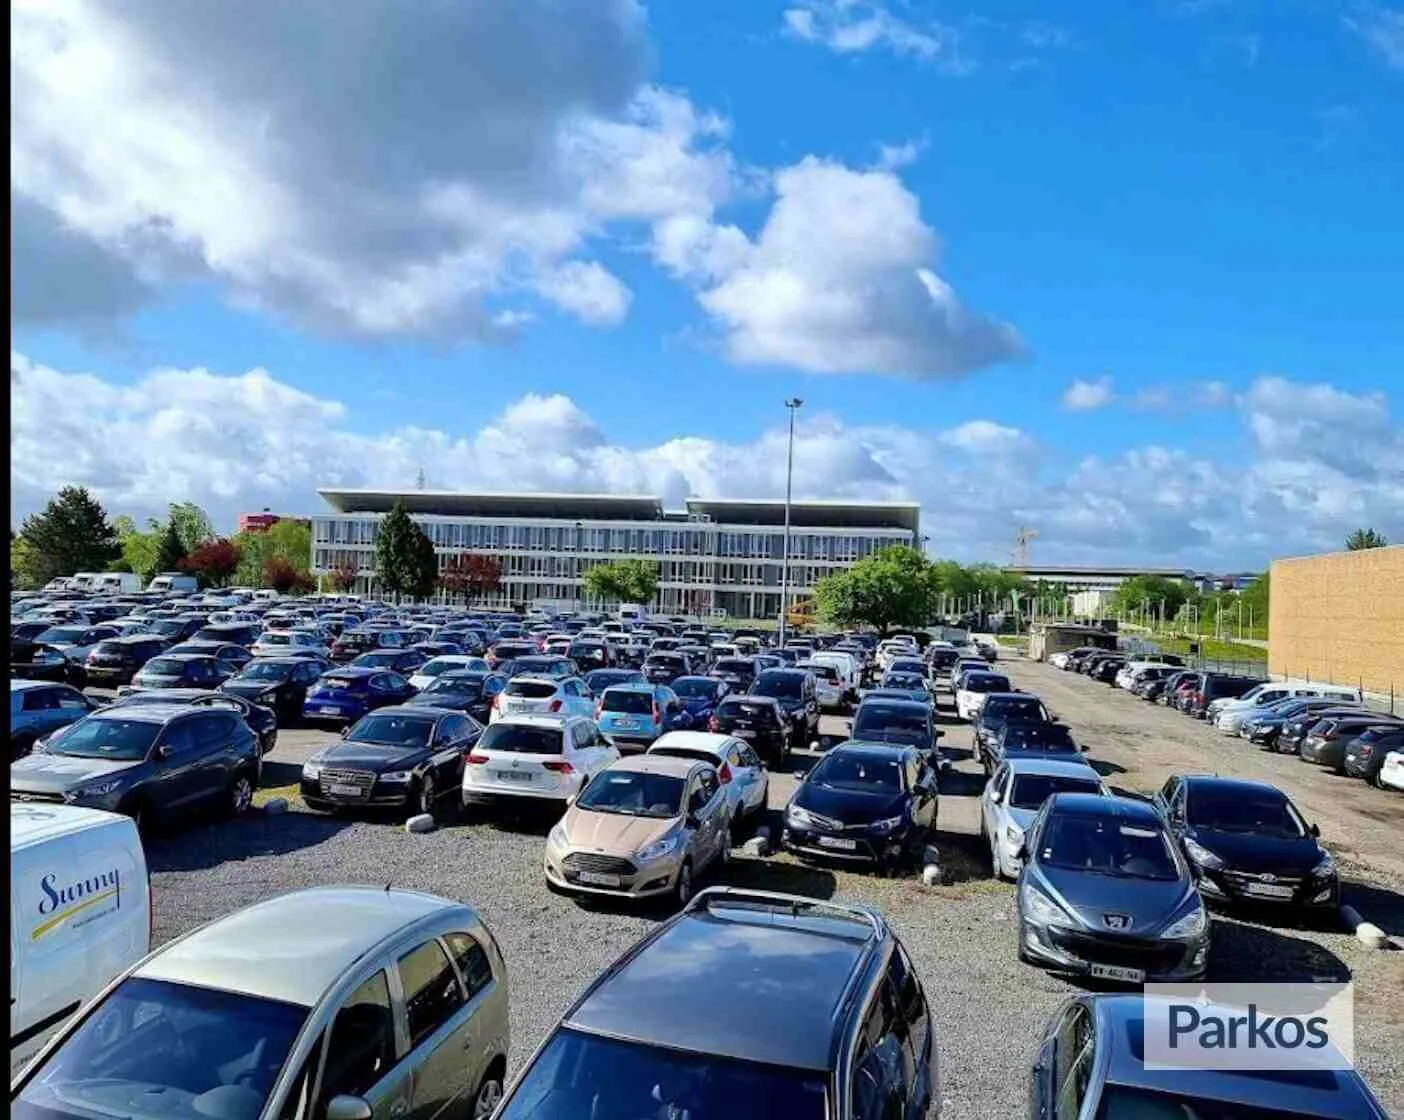 Aeropark Charleroi Low Cost - Parking Charleroi Airport - picture 1